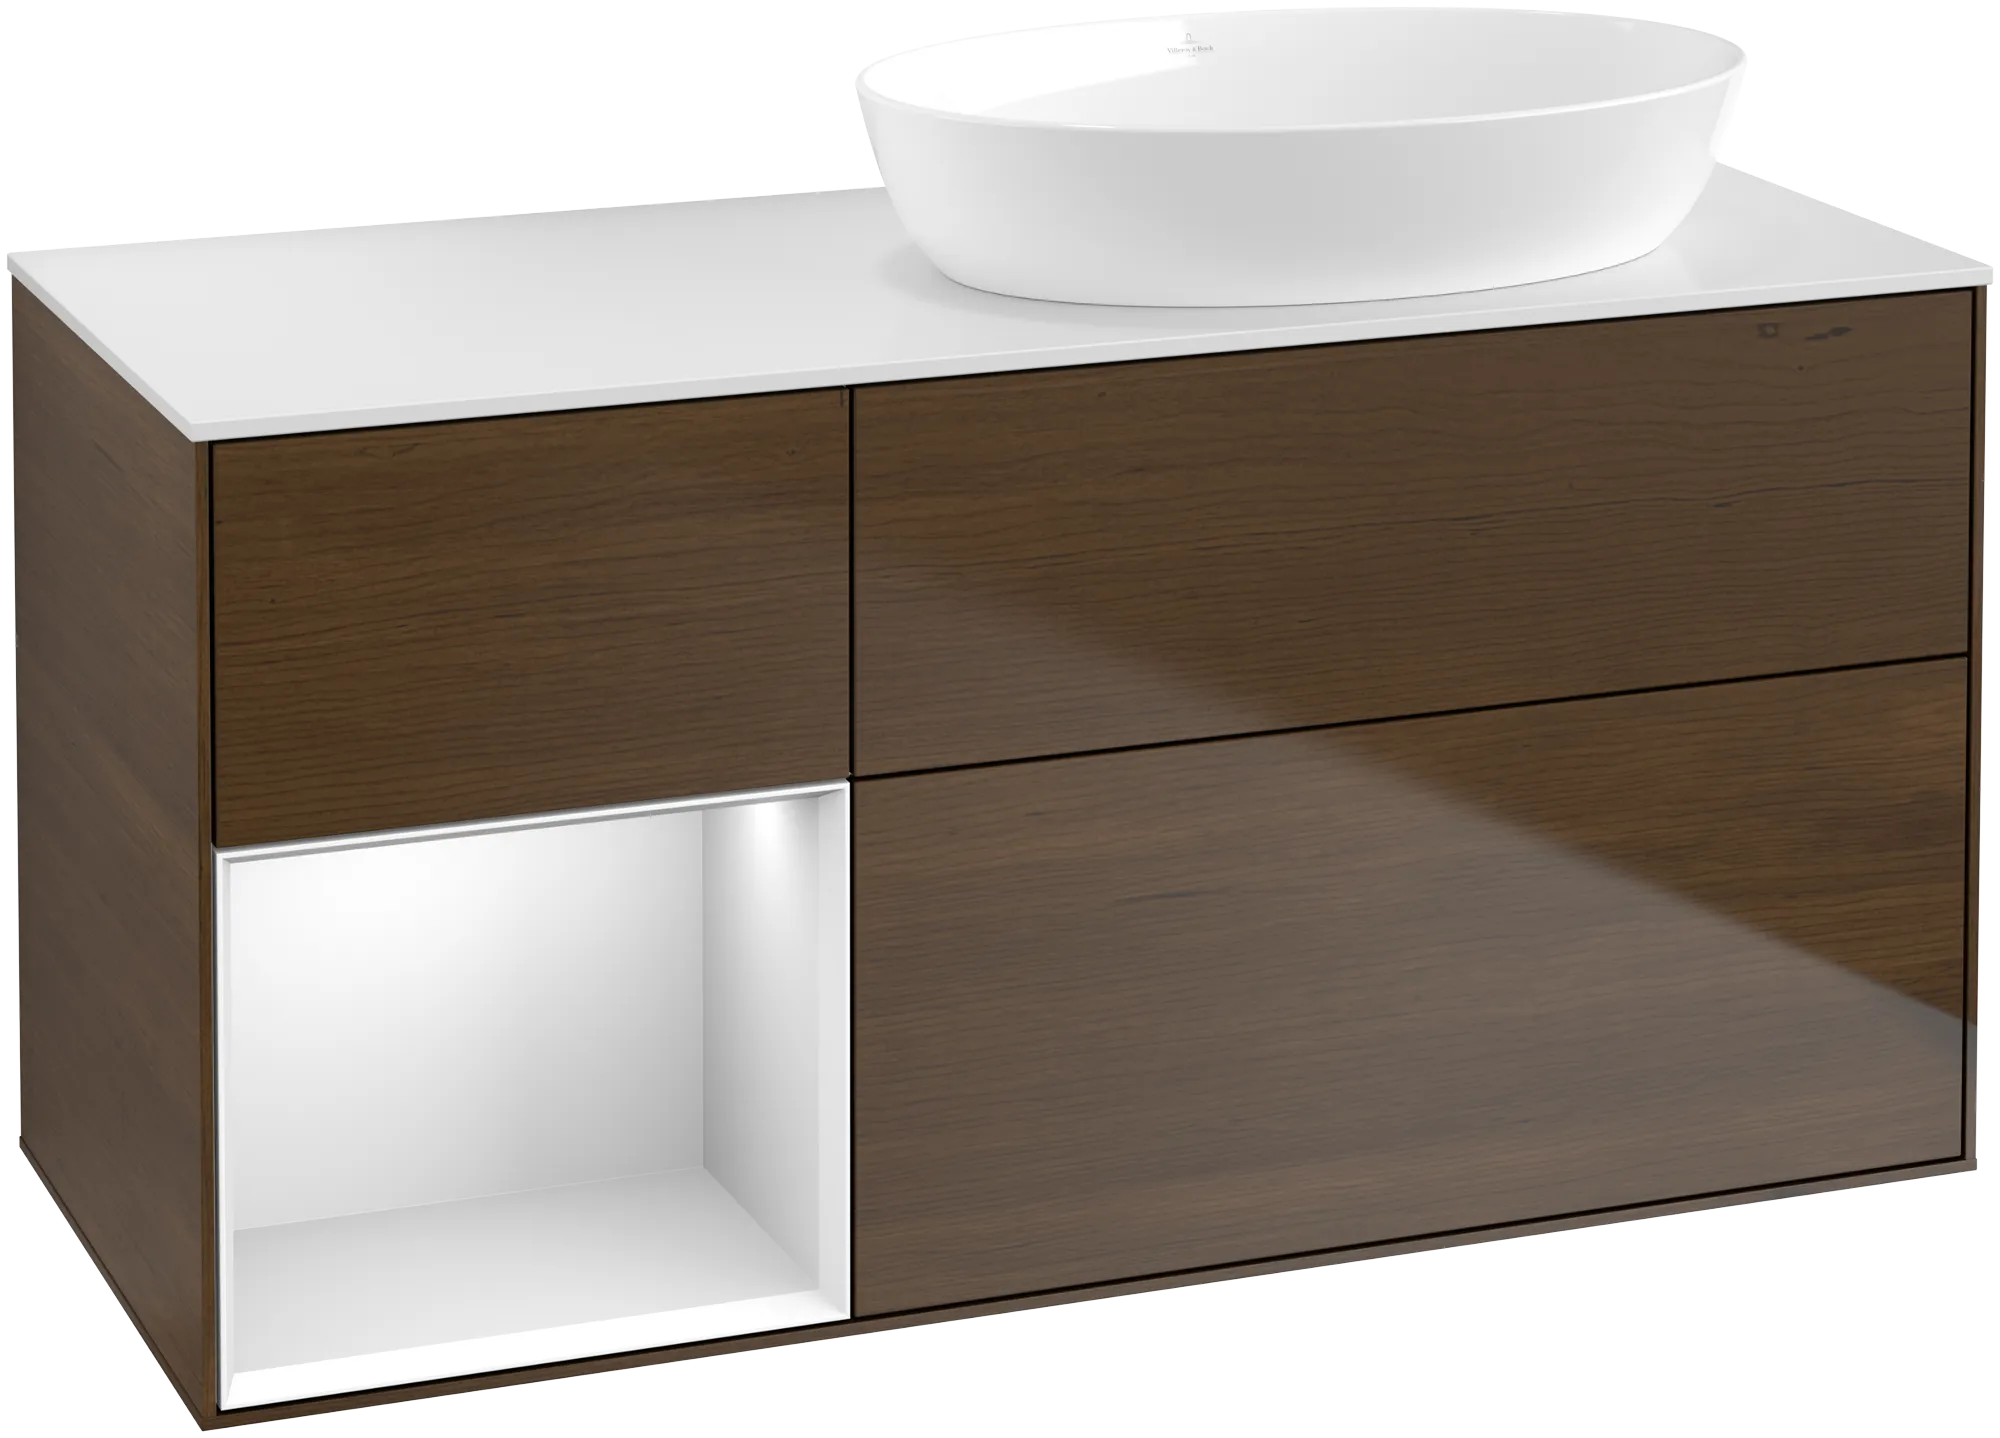 Picture of VILLEROY BOCH Finion Vanity unit, with lighting, 3 pull-out compartments, 1200 x 603 x 501 mm, Walnut Veneer / White Matt Lacquer / Glass White Matt #GA41MTGN